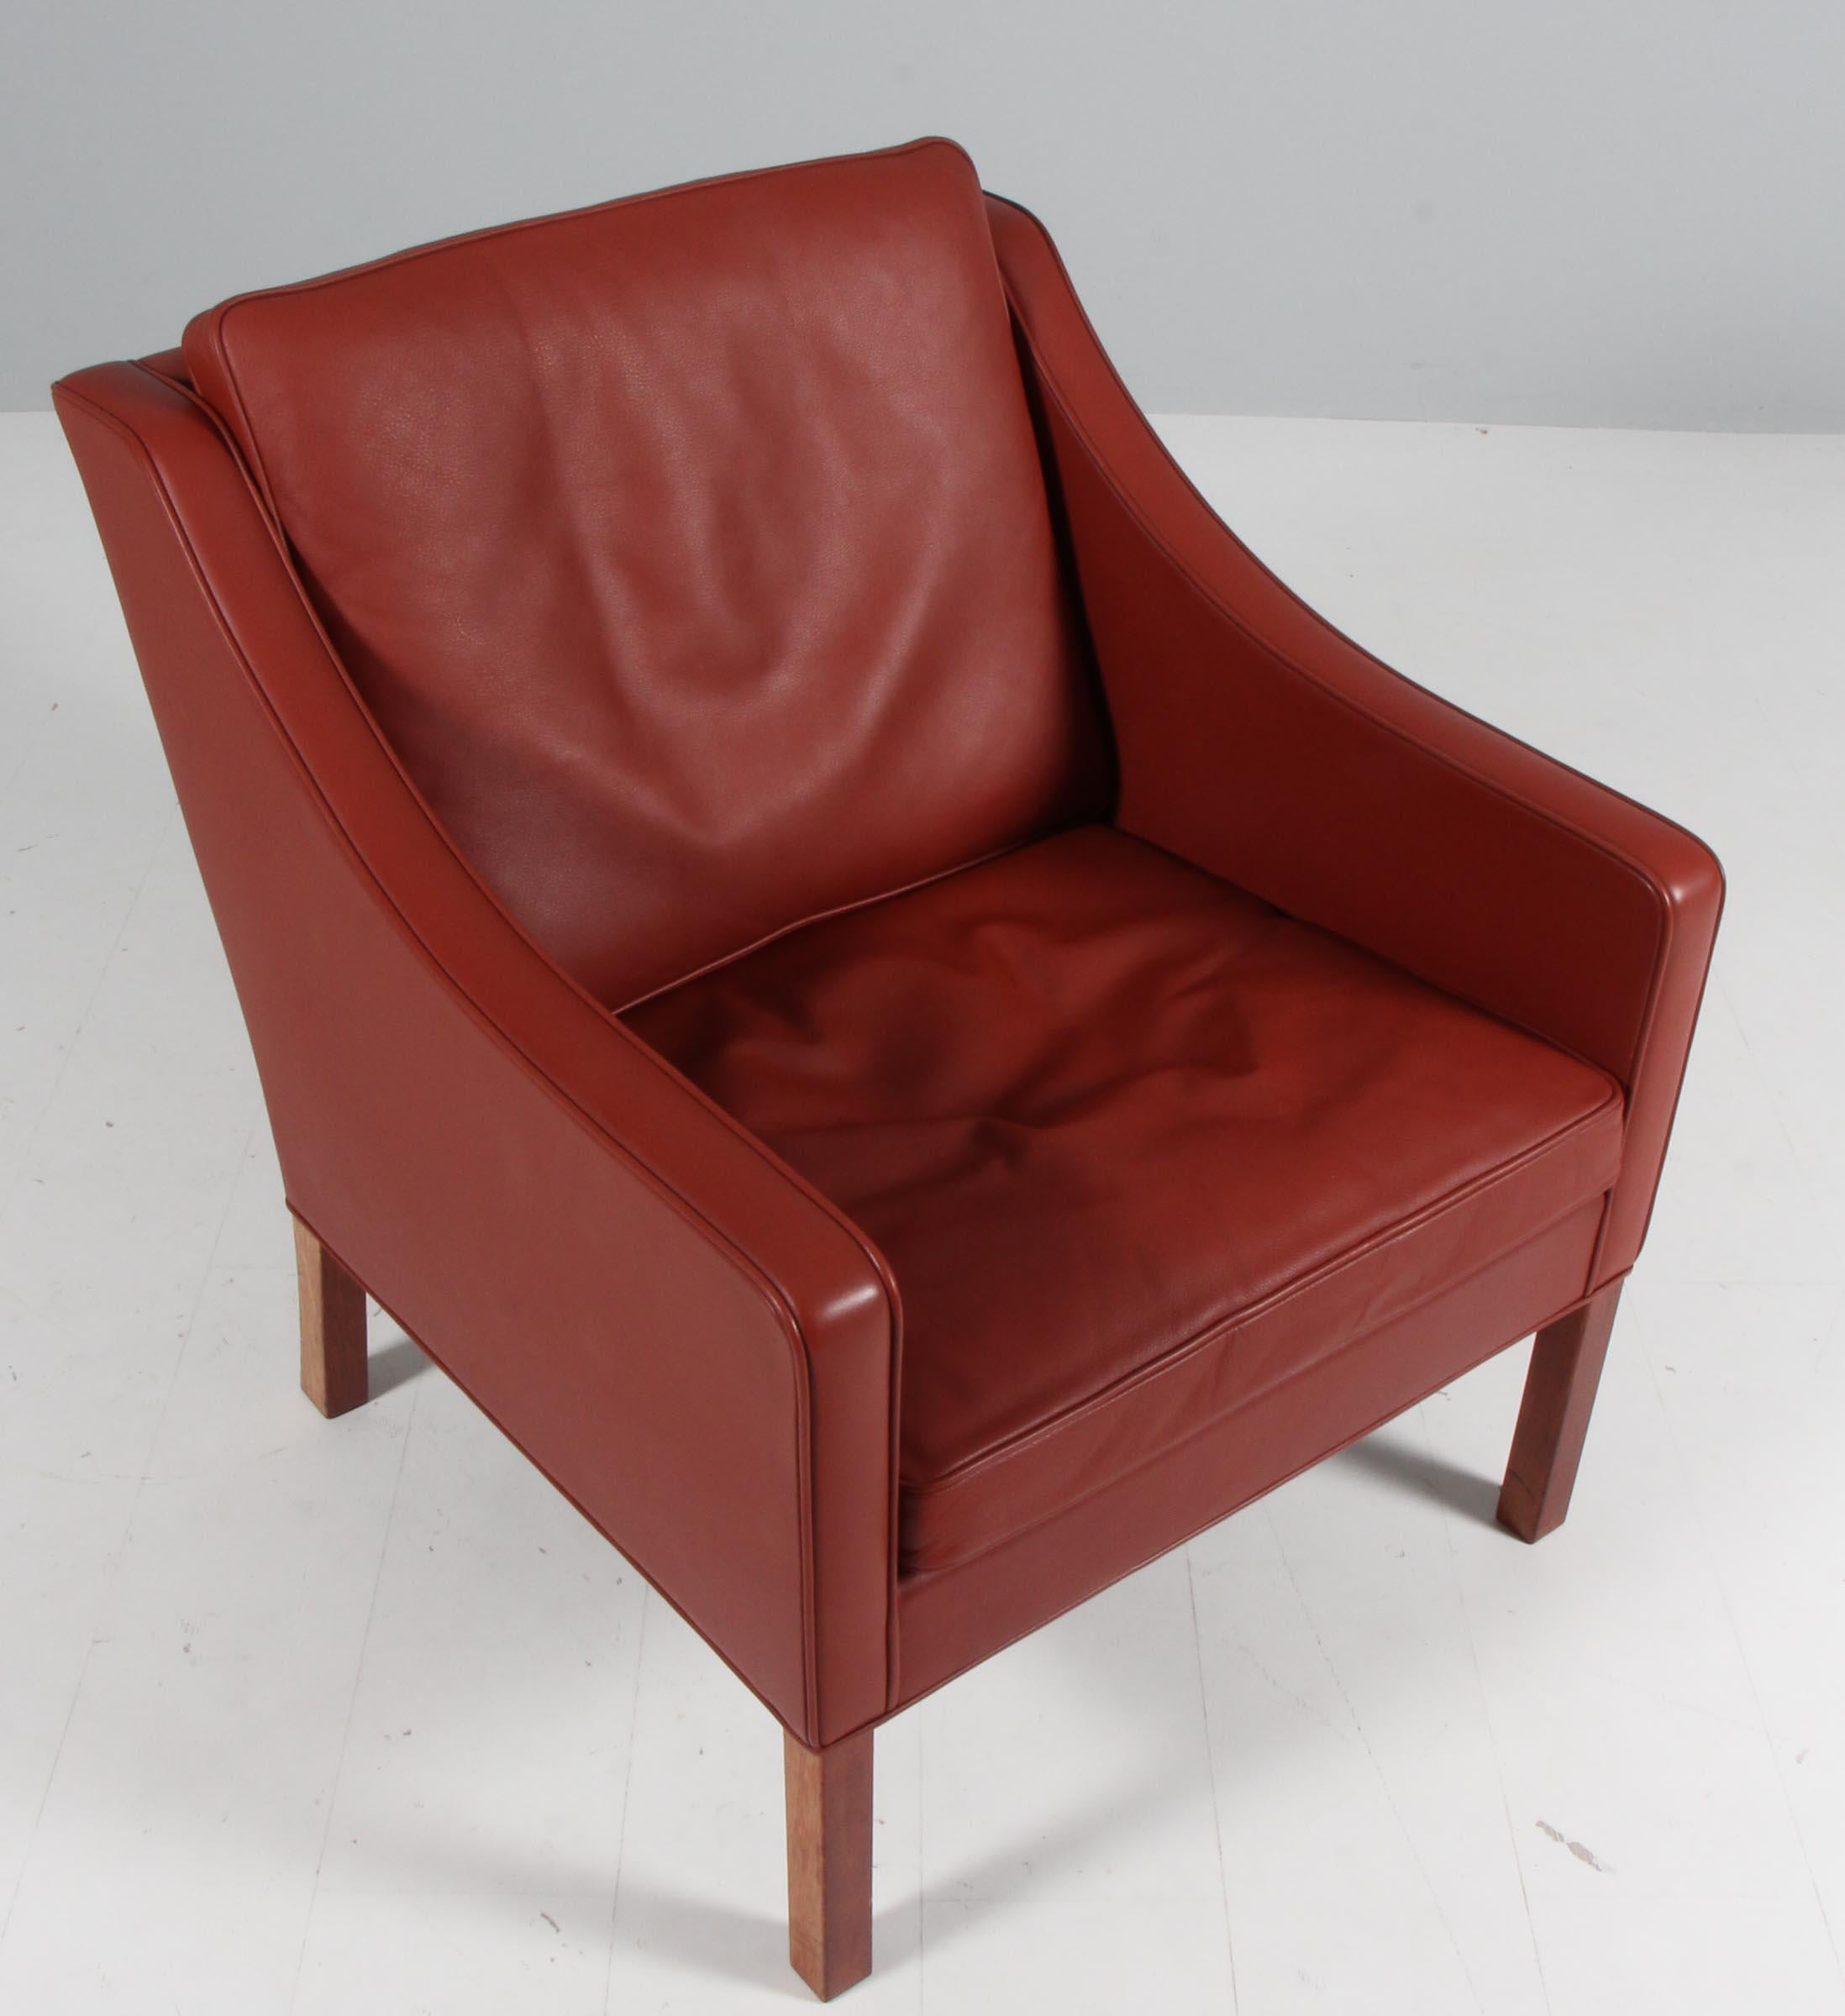 Børge Mogensen lounge chair original upholstered with patinated red leather.

Legs of teak.

Model 2207, made by Fredericia furniture.